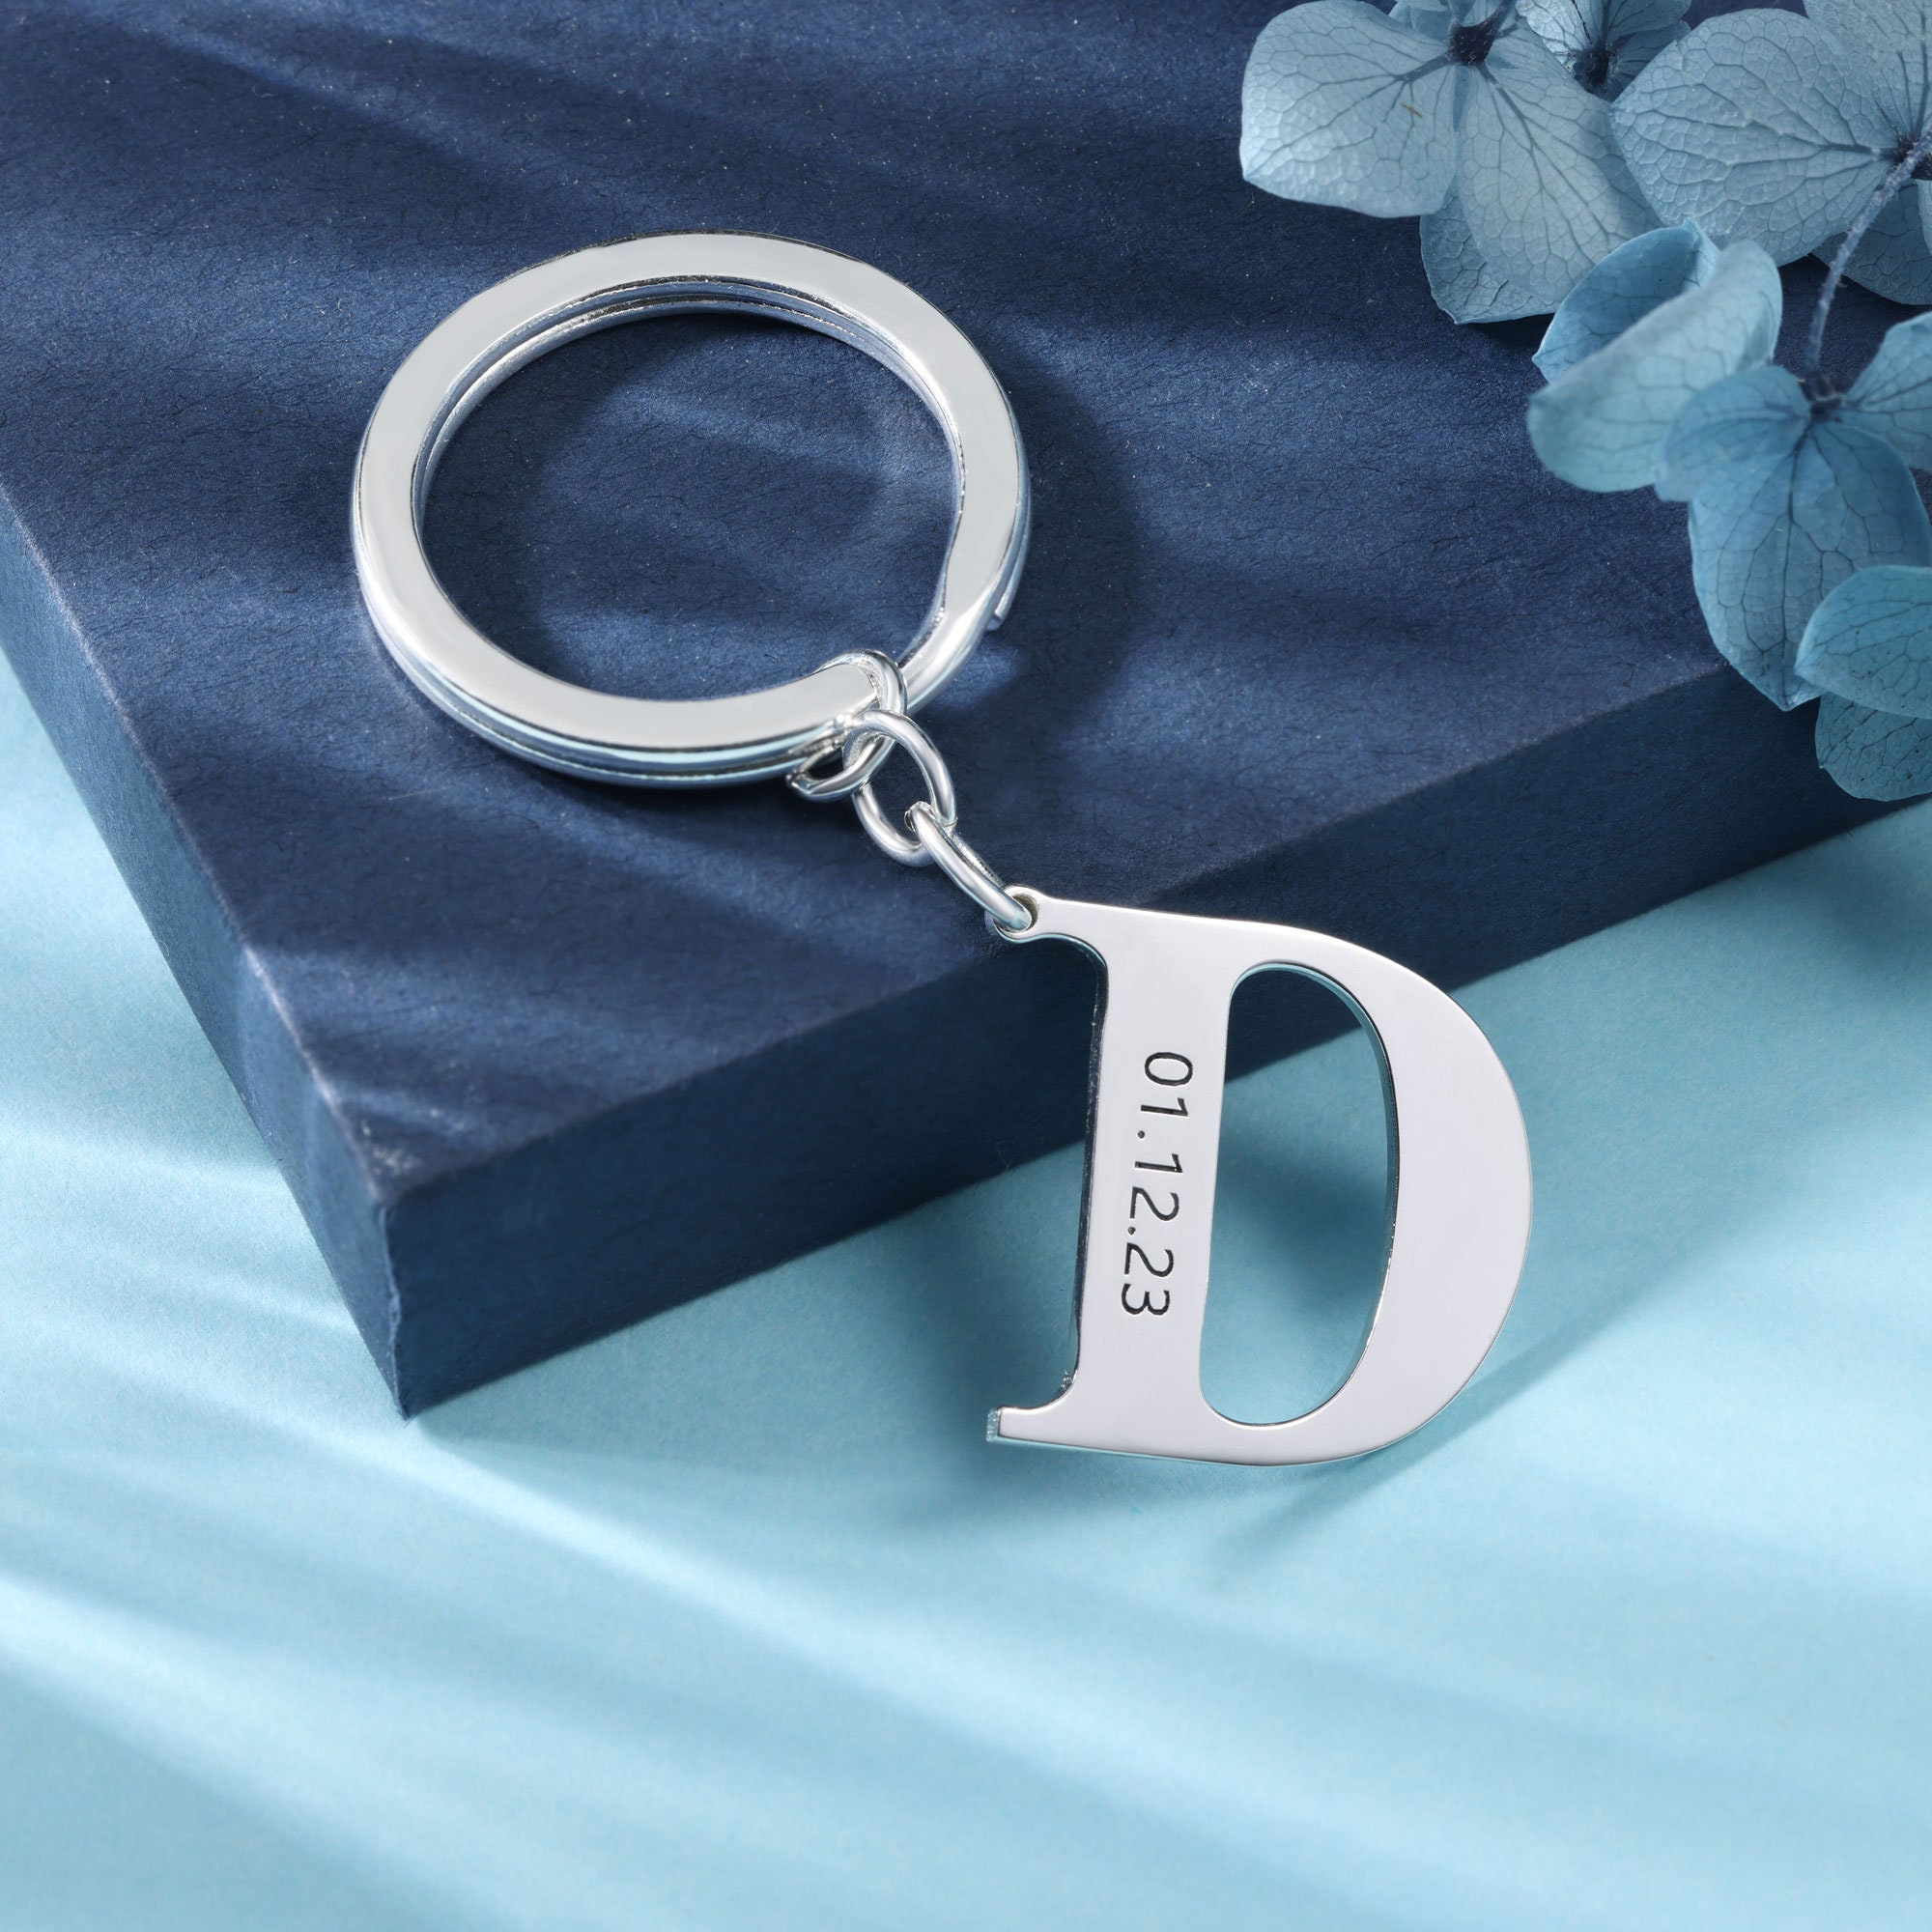 Bulk Order Personalised Initial Keyring, Letter Key Ring, Gifts Under 5,  Party Bag Filler,3d Printed Keychain,keychain Favours,school Bag 